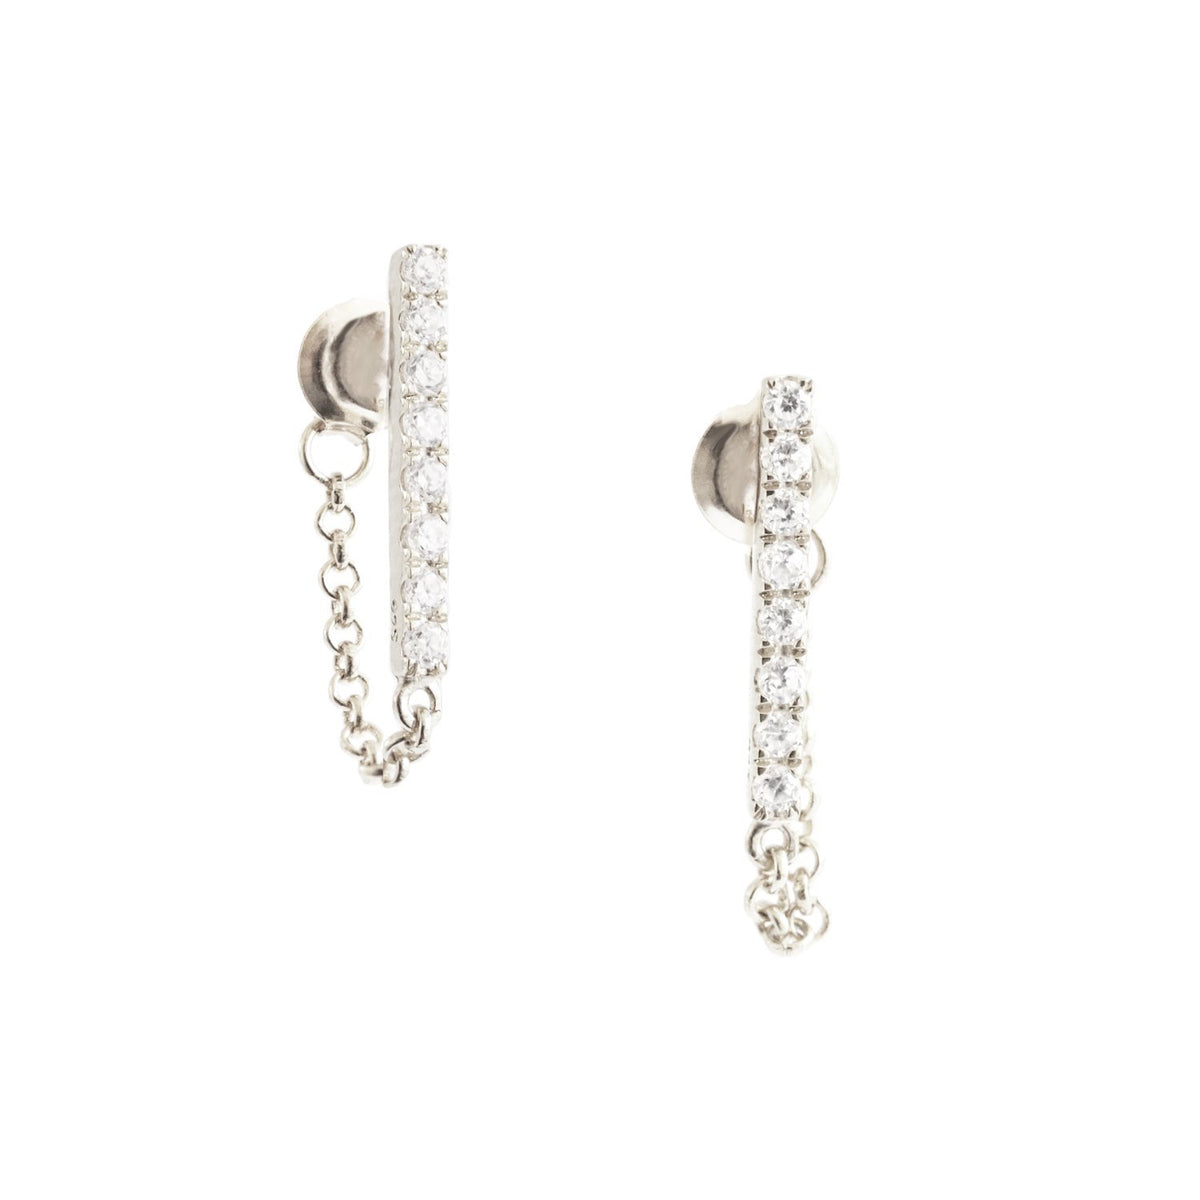 LOVE BAR CHAIN EARRINGS - CUBIC ZIRCONIA &amp; SILVER - SO PRETTY CARA COTTER